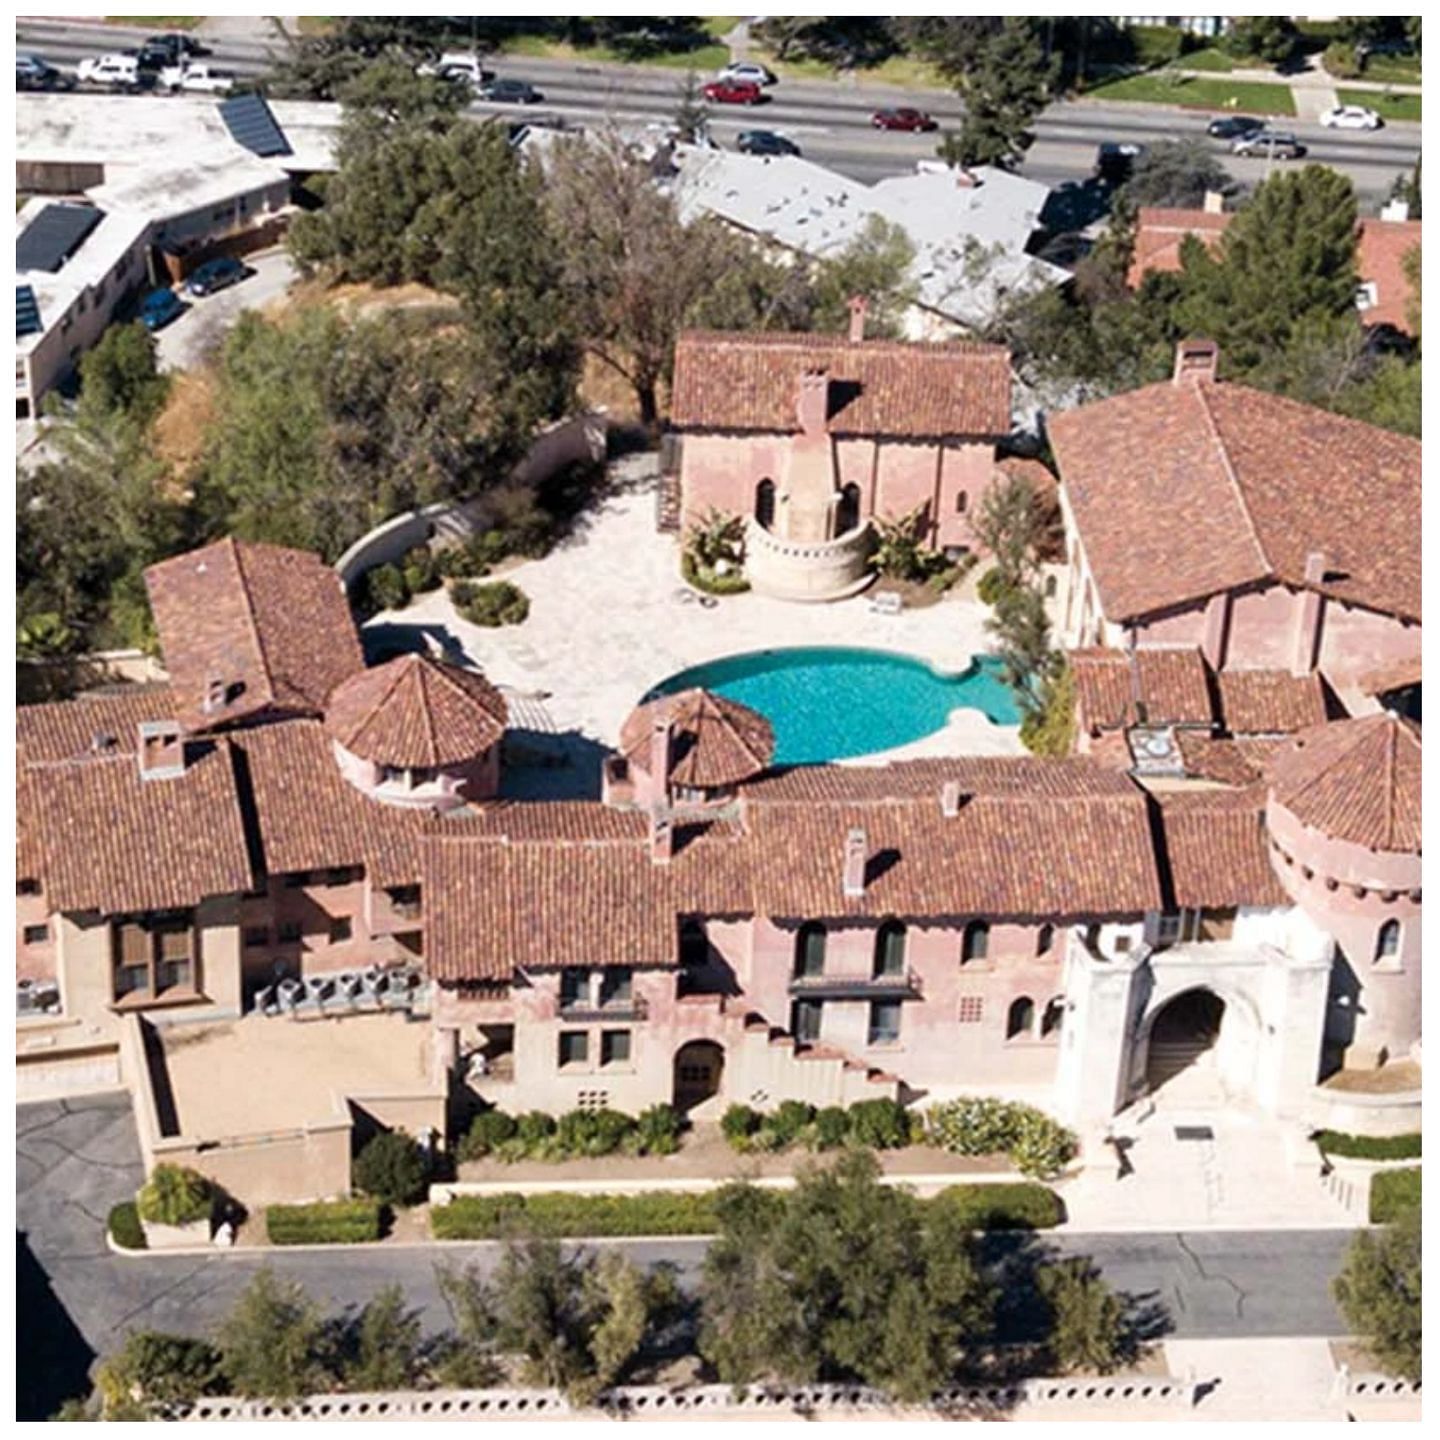 Katy Perry wanted to purchase the convent for her and her mother to stay in. (Image via LA Times)